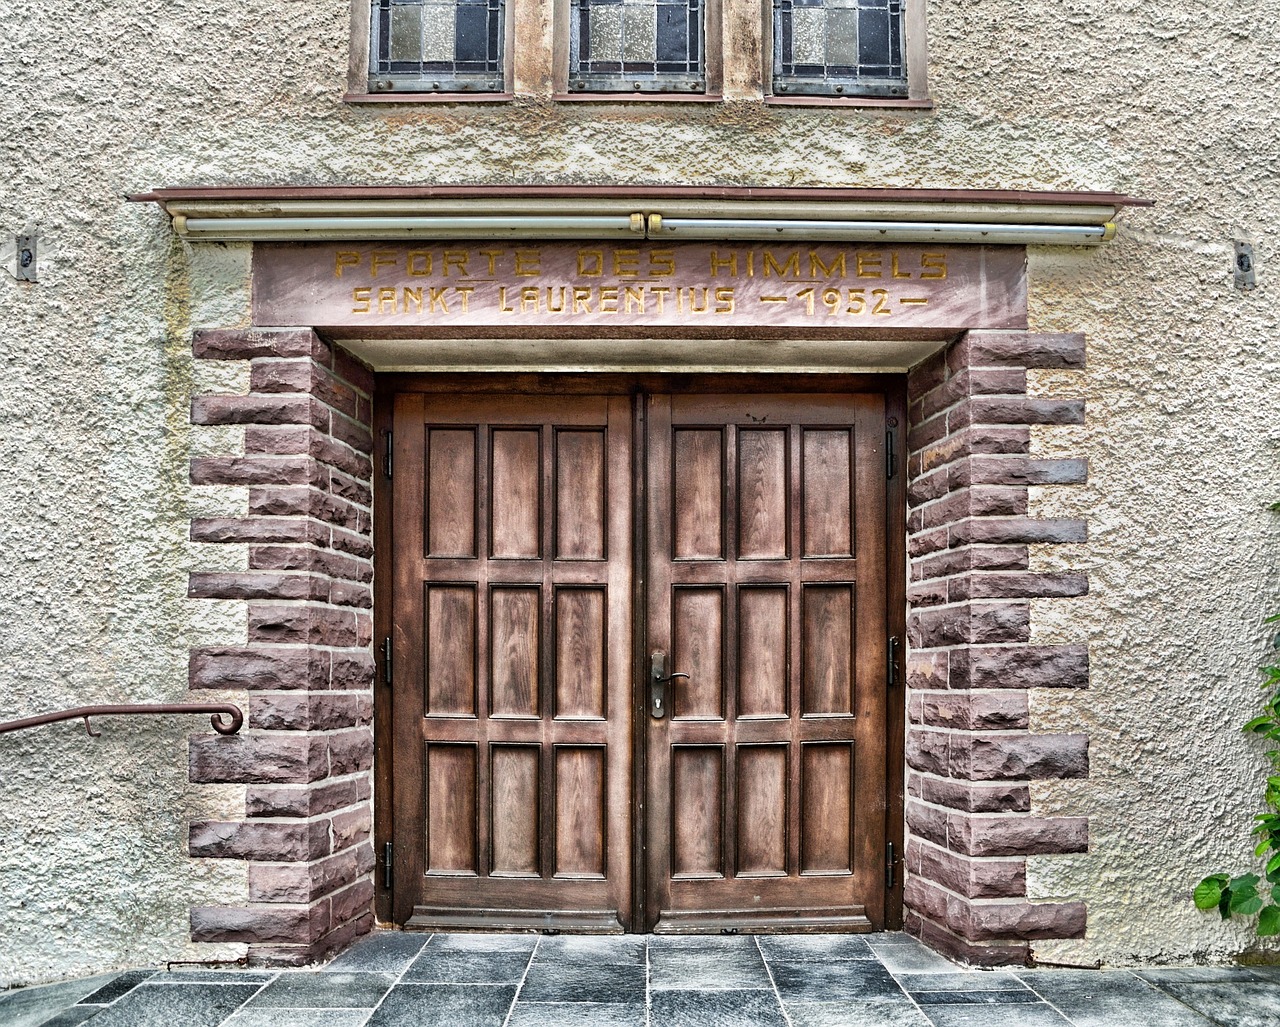 Using Windows and Doorways to Enhance Composition